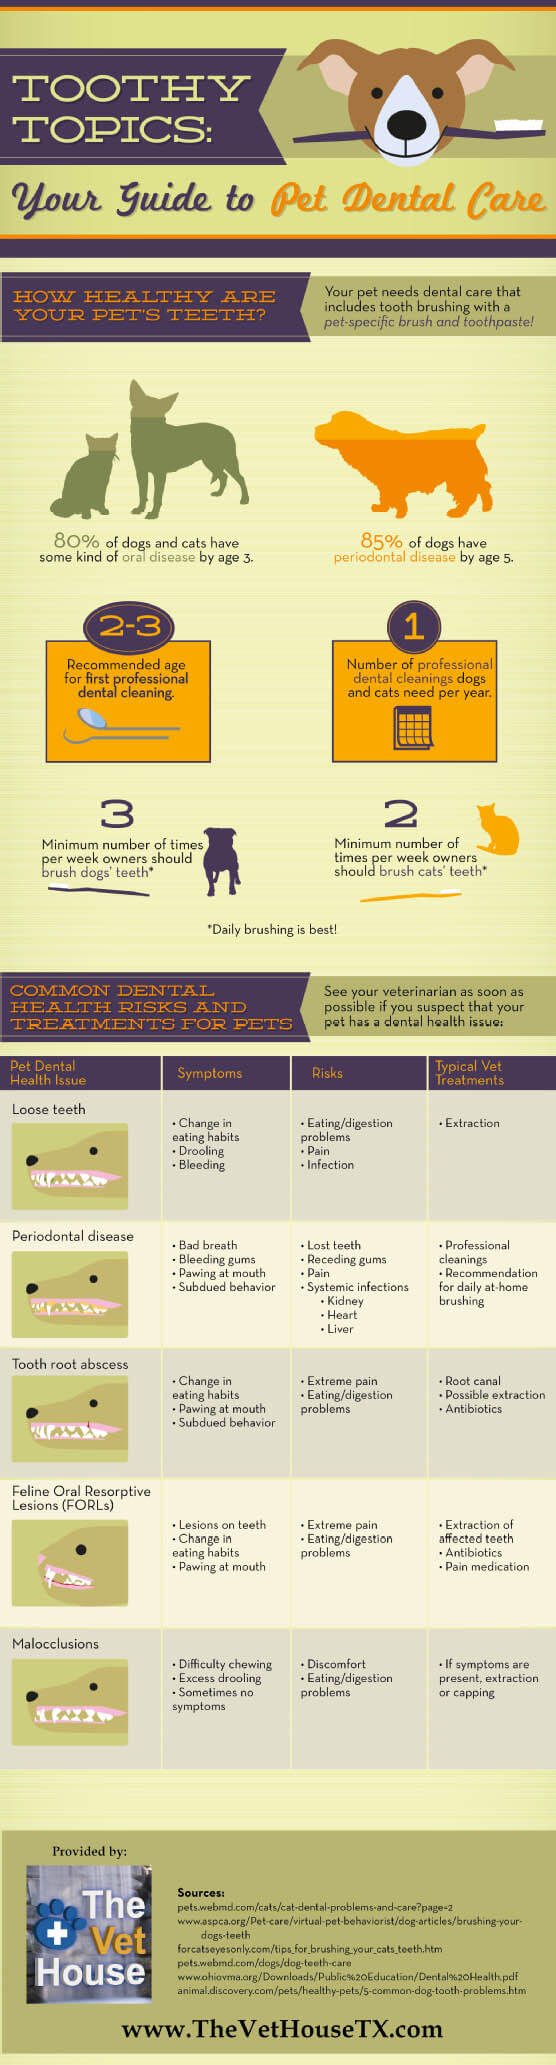 DOG TEETH, JAWS - DENTAL CARE - INFOGRAPHICS, PRESS TO SEE IN FULL SIZE!